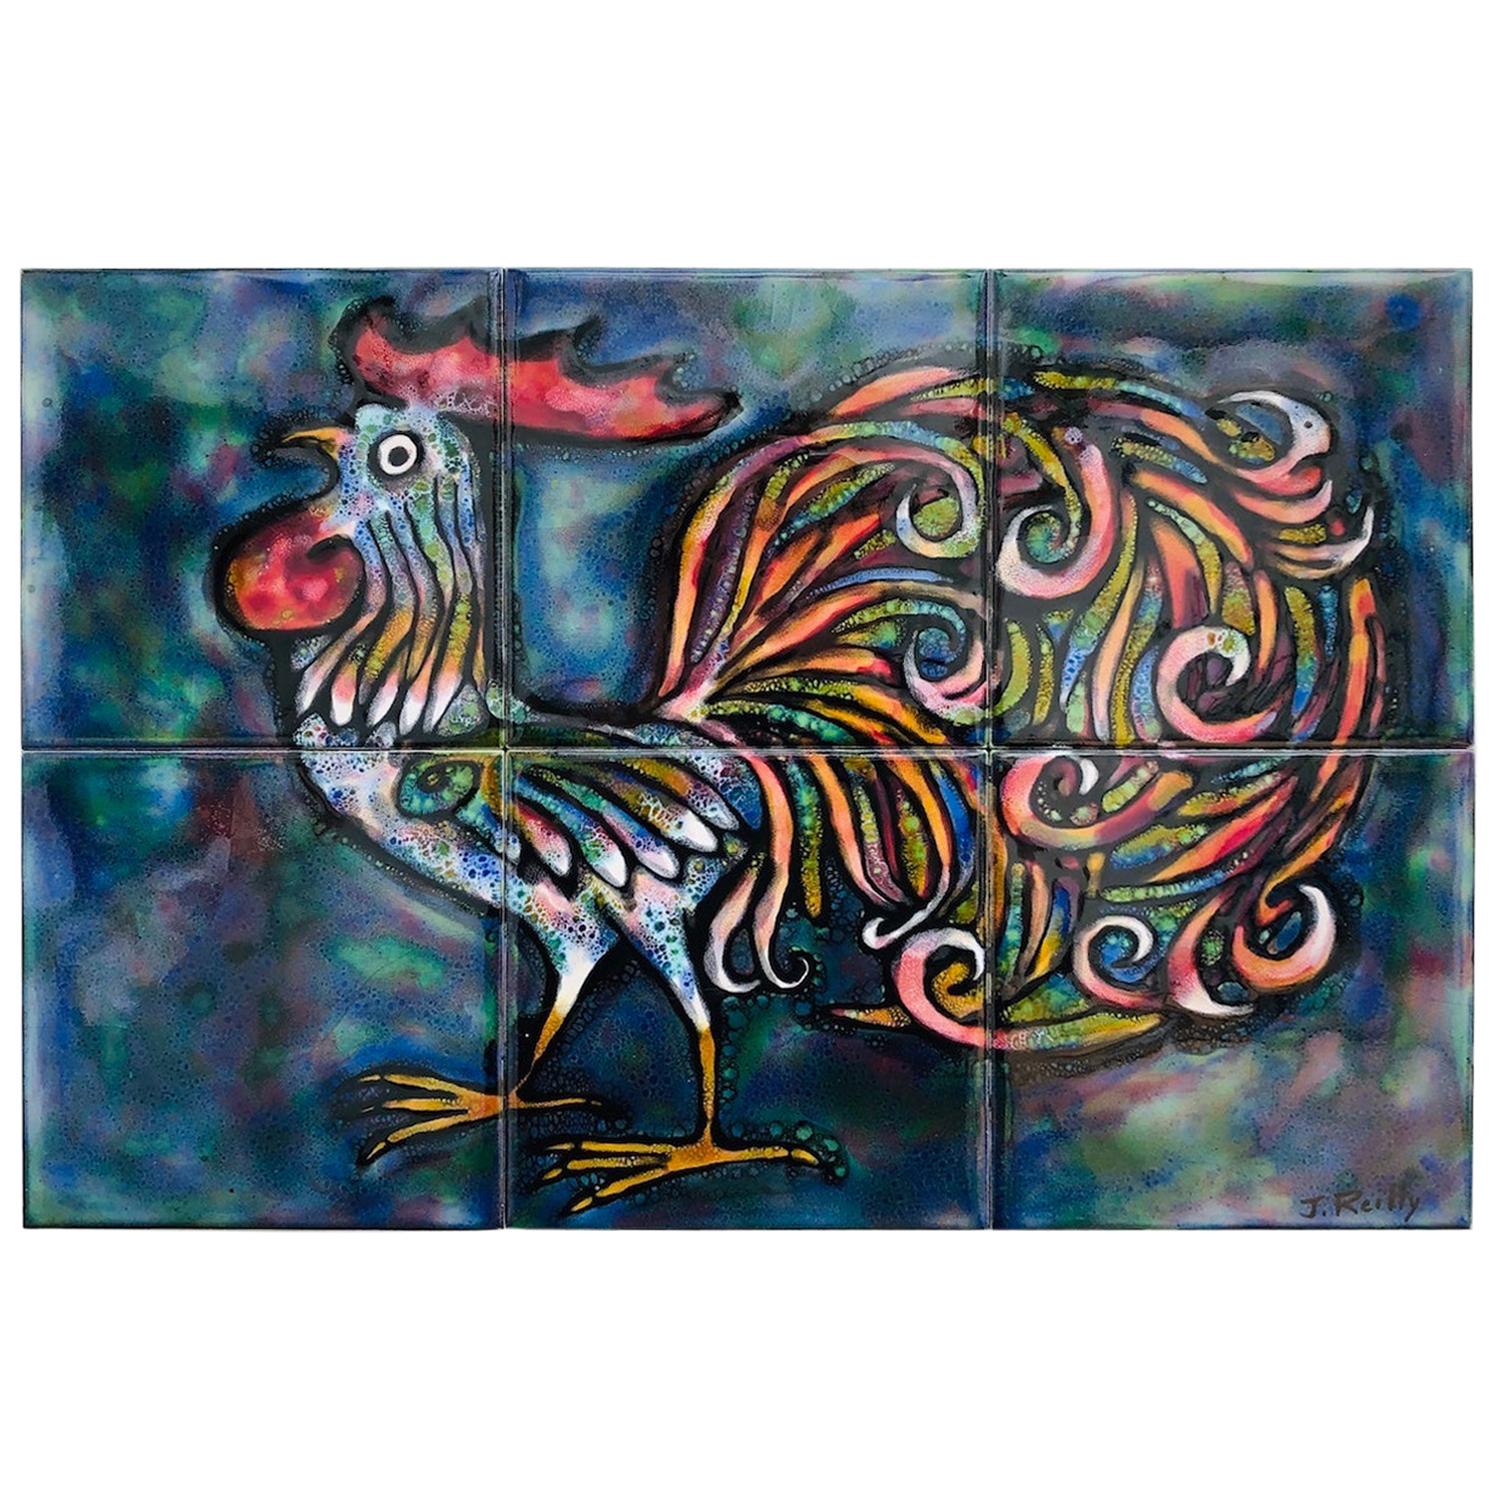 Ceramic Tile Artwork of a Cockeral, by John Reilly, Isle of Wight Pottery, 1970s